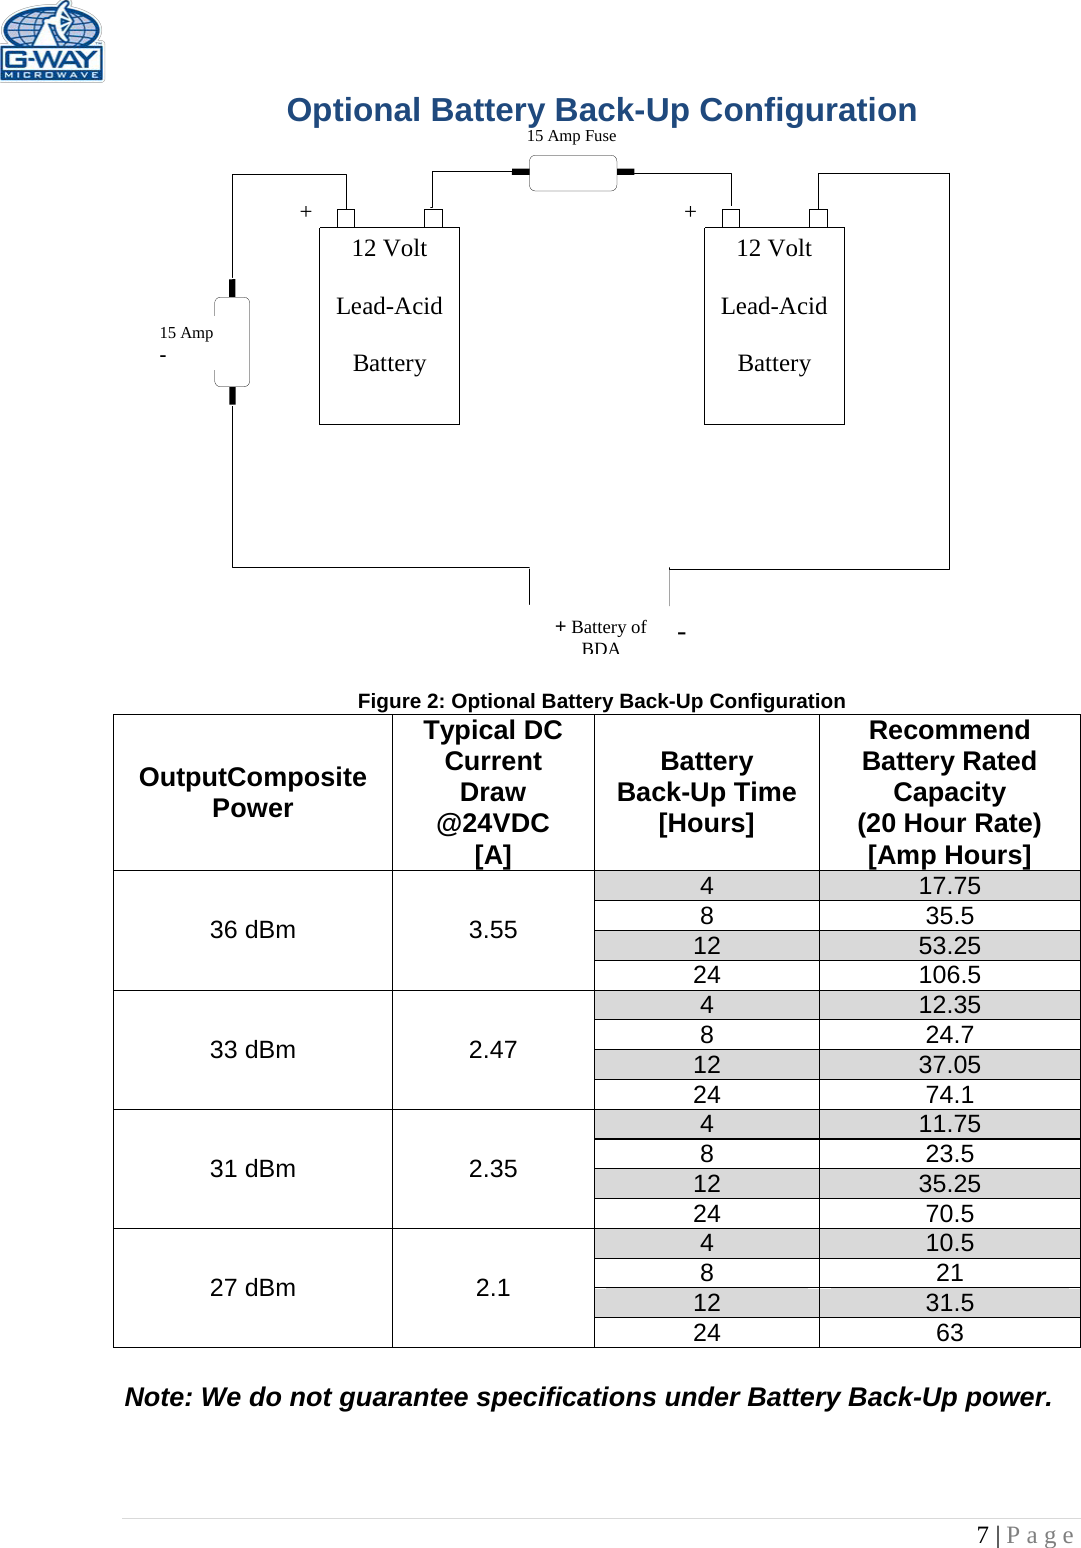   7 | Page  15 Amp Fuse 15 Amp -       12 Volt  Lead-Acid  Battery  12 Volt  Lead-Acid  Battery  + + + Battery of  BDA - Optional Battery Back-Up Configuration                  Figure 2: Optional Battery Back-Up Configuration OutputComposite Power Typical DC Current  Draw @24VDC [A] Battery Back-Up Time [Hours] Recommend Battery Rated Capacity (20 Hour Rate) [Amp Hours] 36 dBm 3.55 4 17.75 8 35.5 12 53.25 24 106.5 33 dBm 2.47 4 12.35 8 24.7 12 37.05 24 74.1 31 dBm  2.35 4 11.75 8 23.5 12 35.25 24 70.5 27 dBm 2.1 4 10.5 8 21 12 31.5 24 63  Note: We do not guarantee specifications under Battery Back-Up power.  